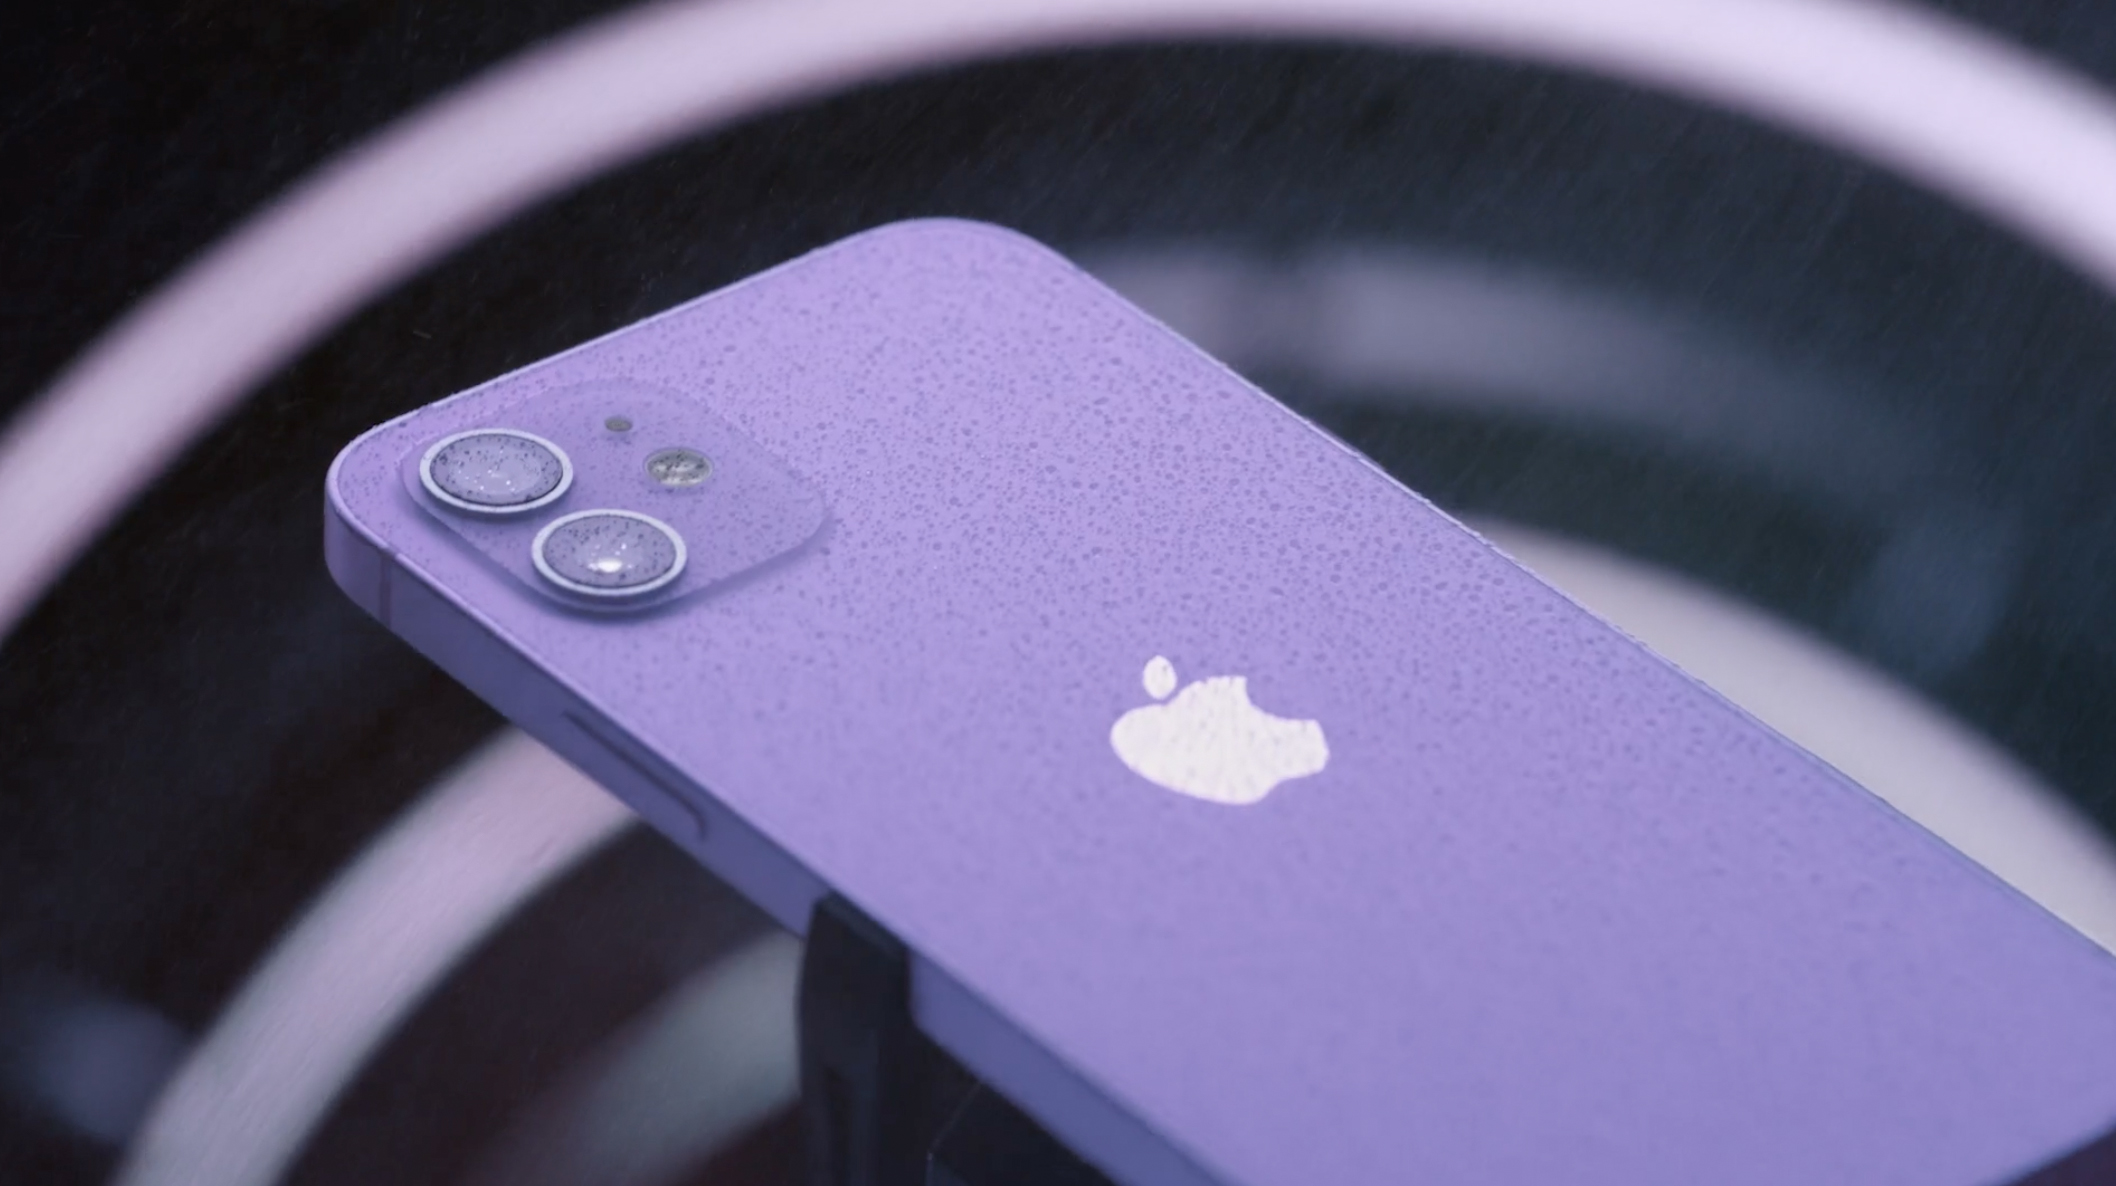 Purple iPhone 12 wallpaper is now available here s how to grab it 